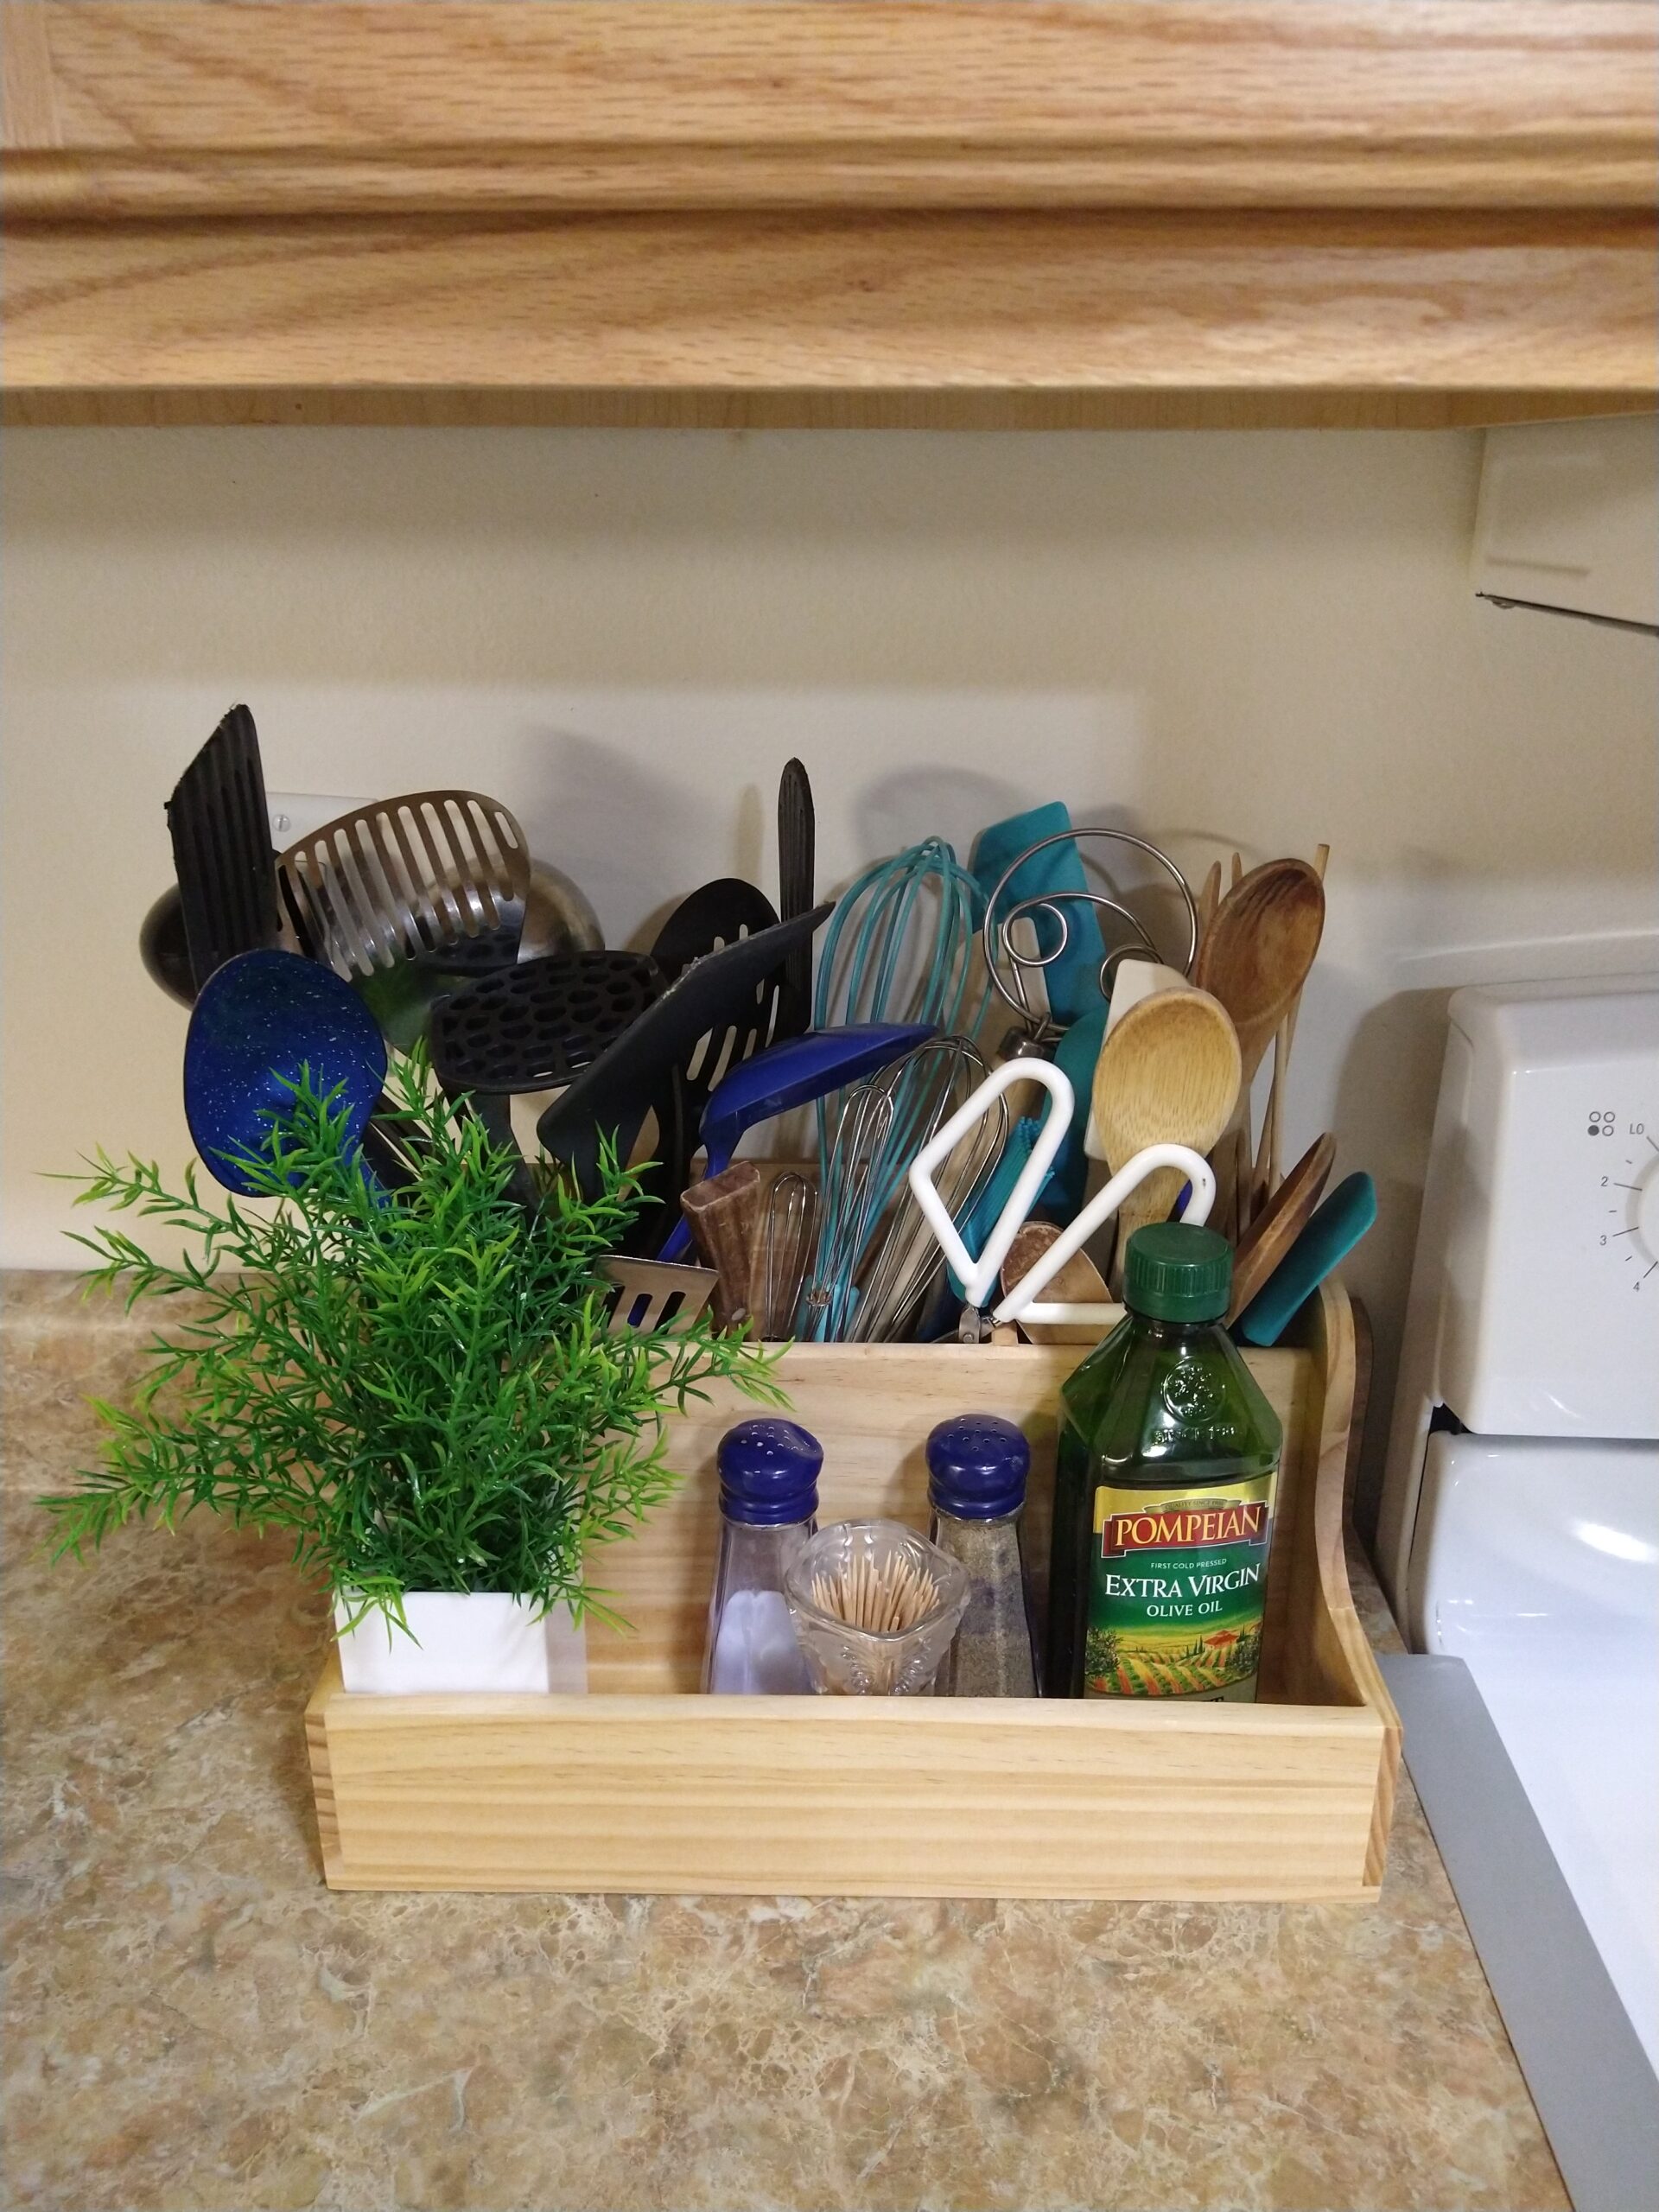 Kitchen utensil caddy on the counter with rosemary plant.